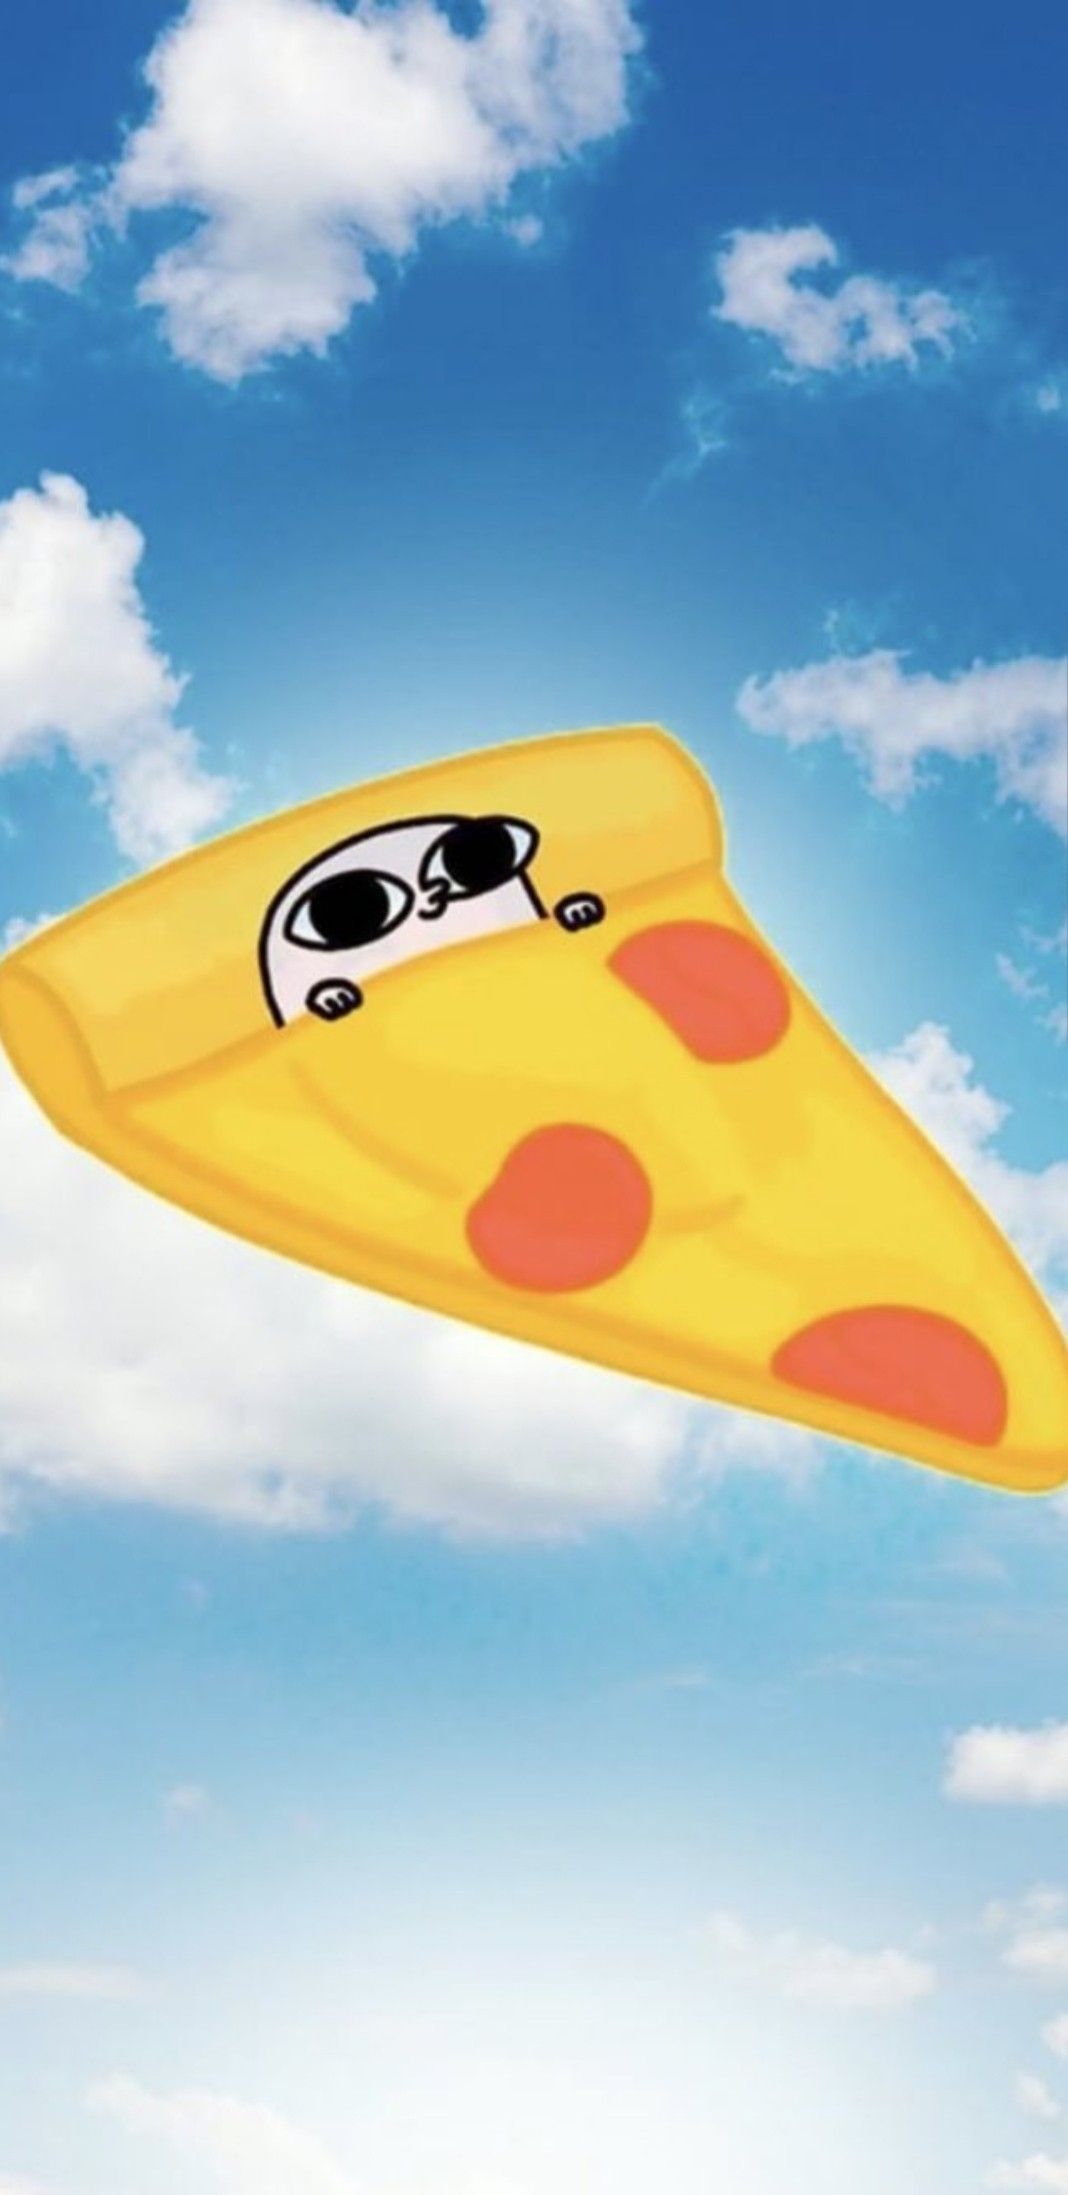 Ketnipz Wallpaper Pizza In The Sky Funny Meme Background For Phone HD Wallpaper